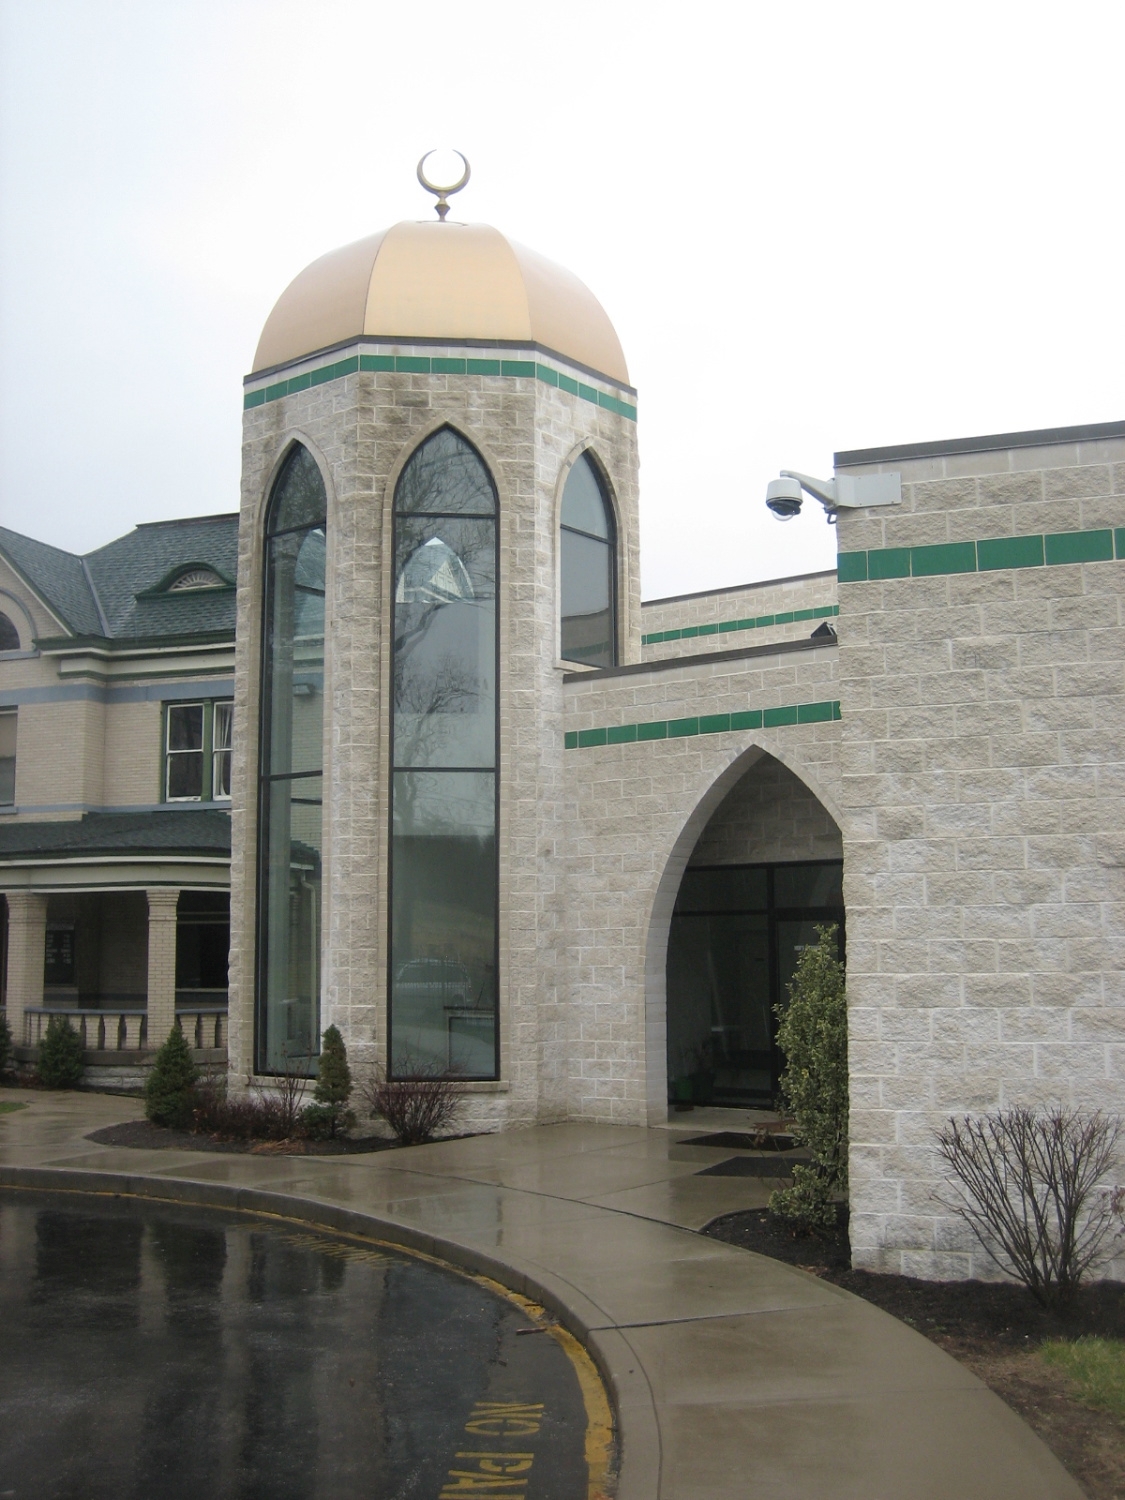 Tower topped with a gold dome at the mosque entrance